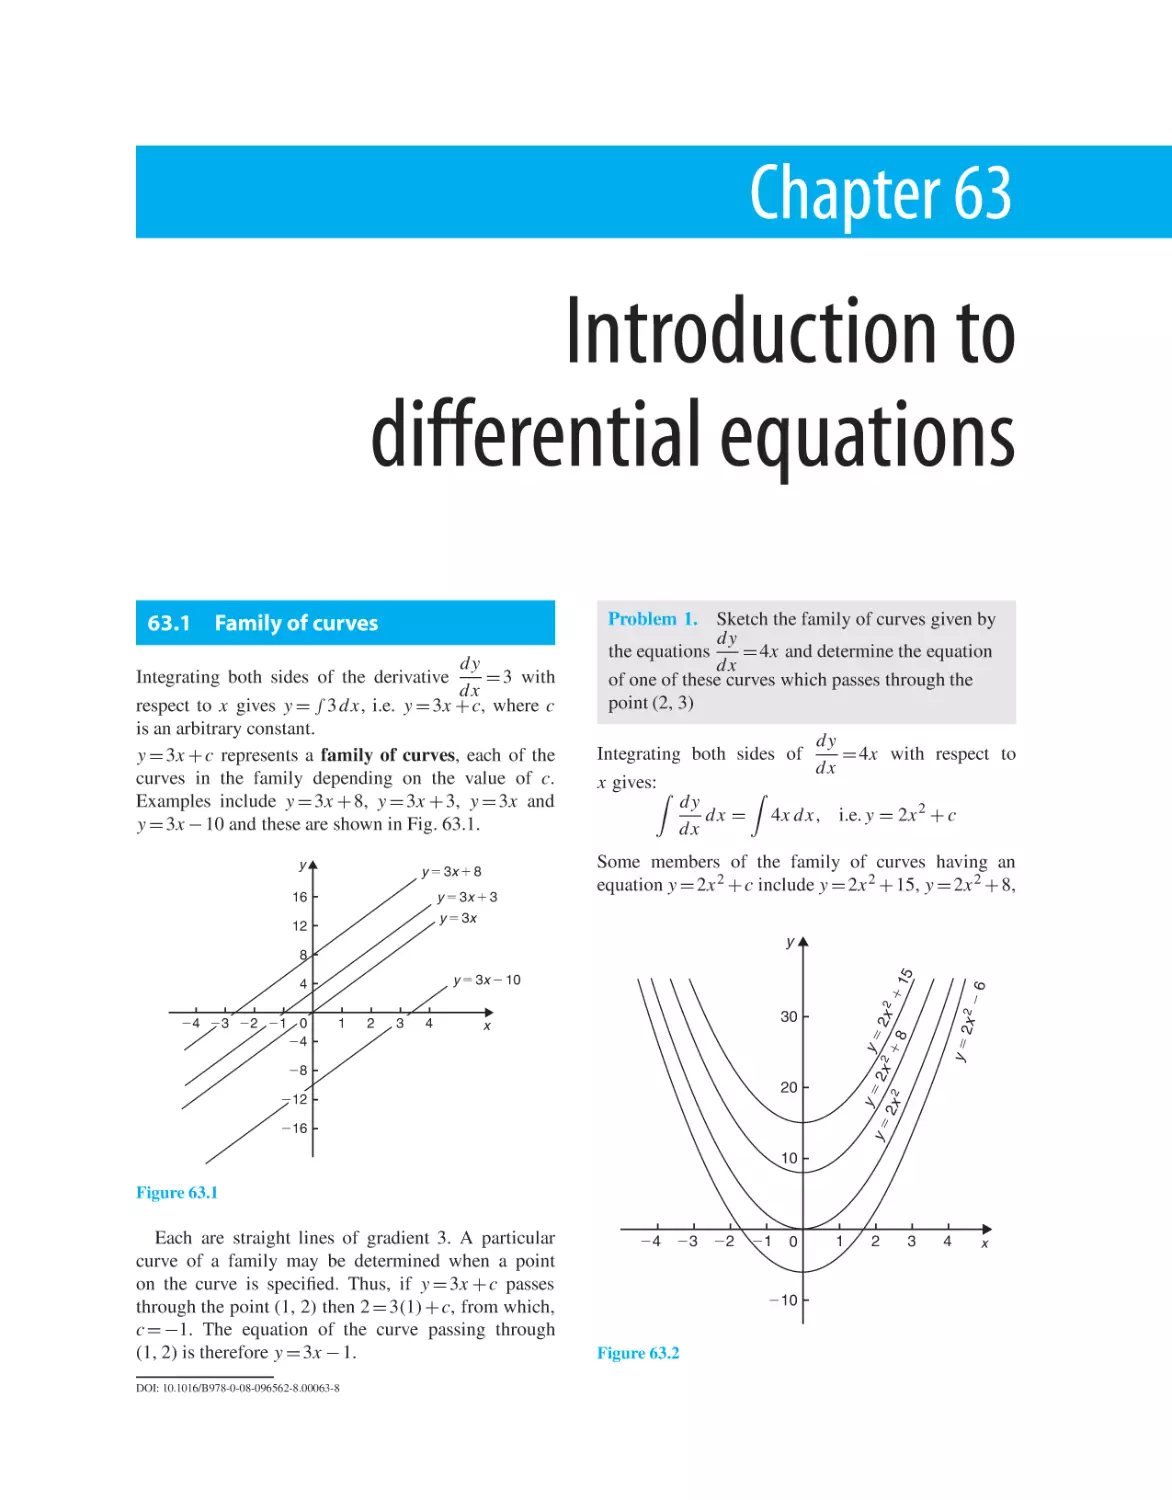 Chapter 63. Introduction to differential equations
63.1 Family of curves